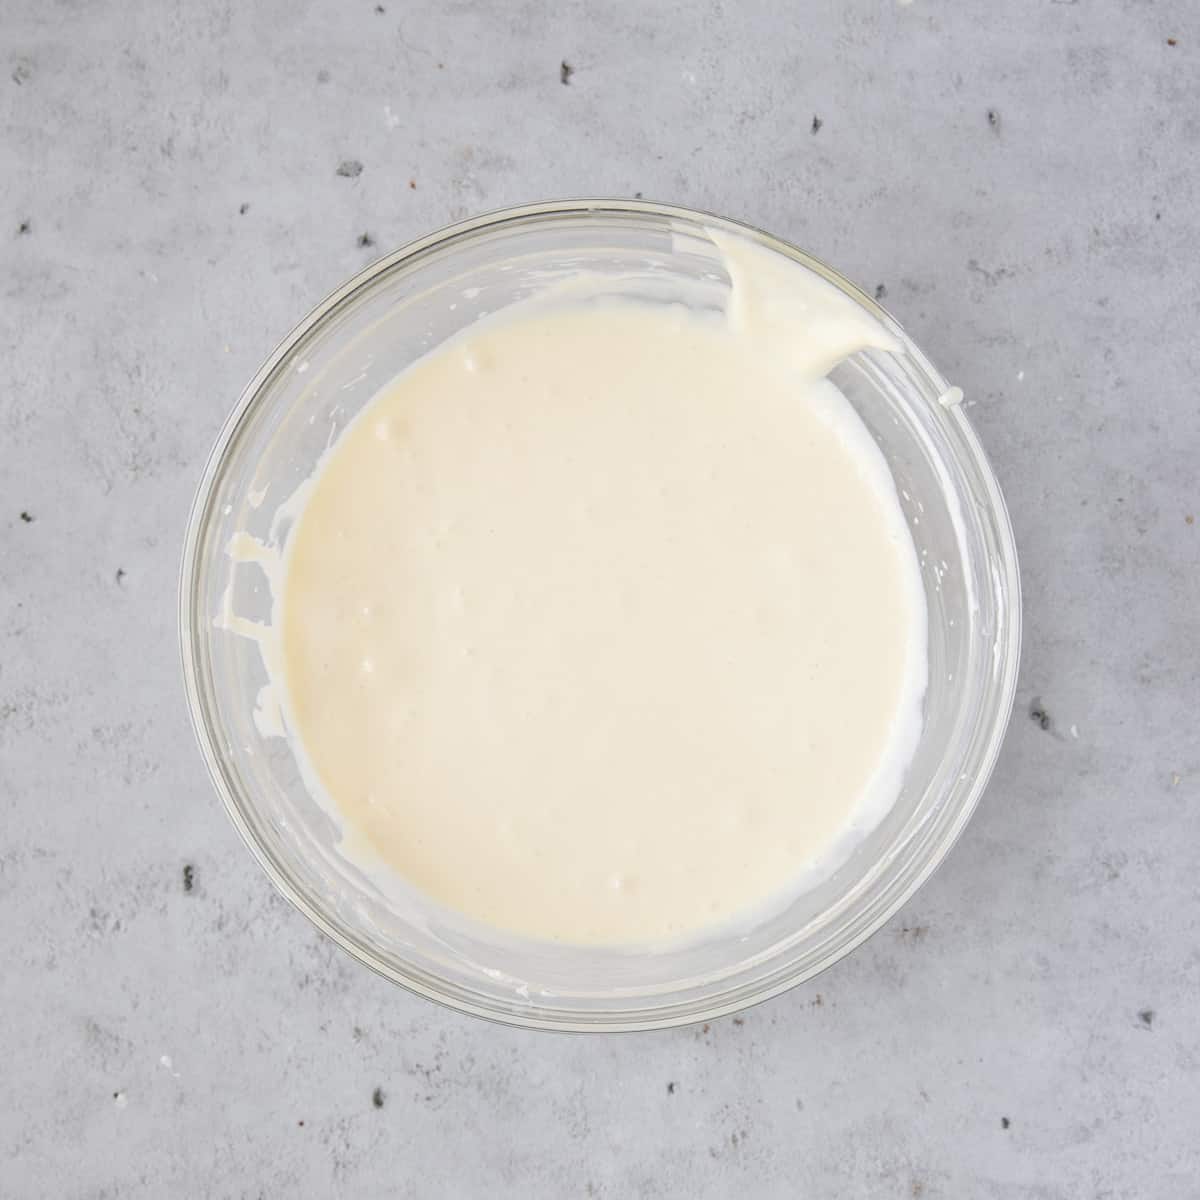 the cheesecake filling in a glass bowl on a grey background